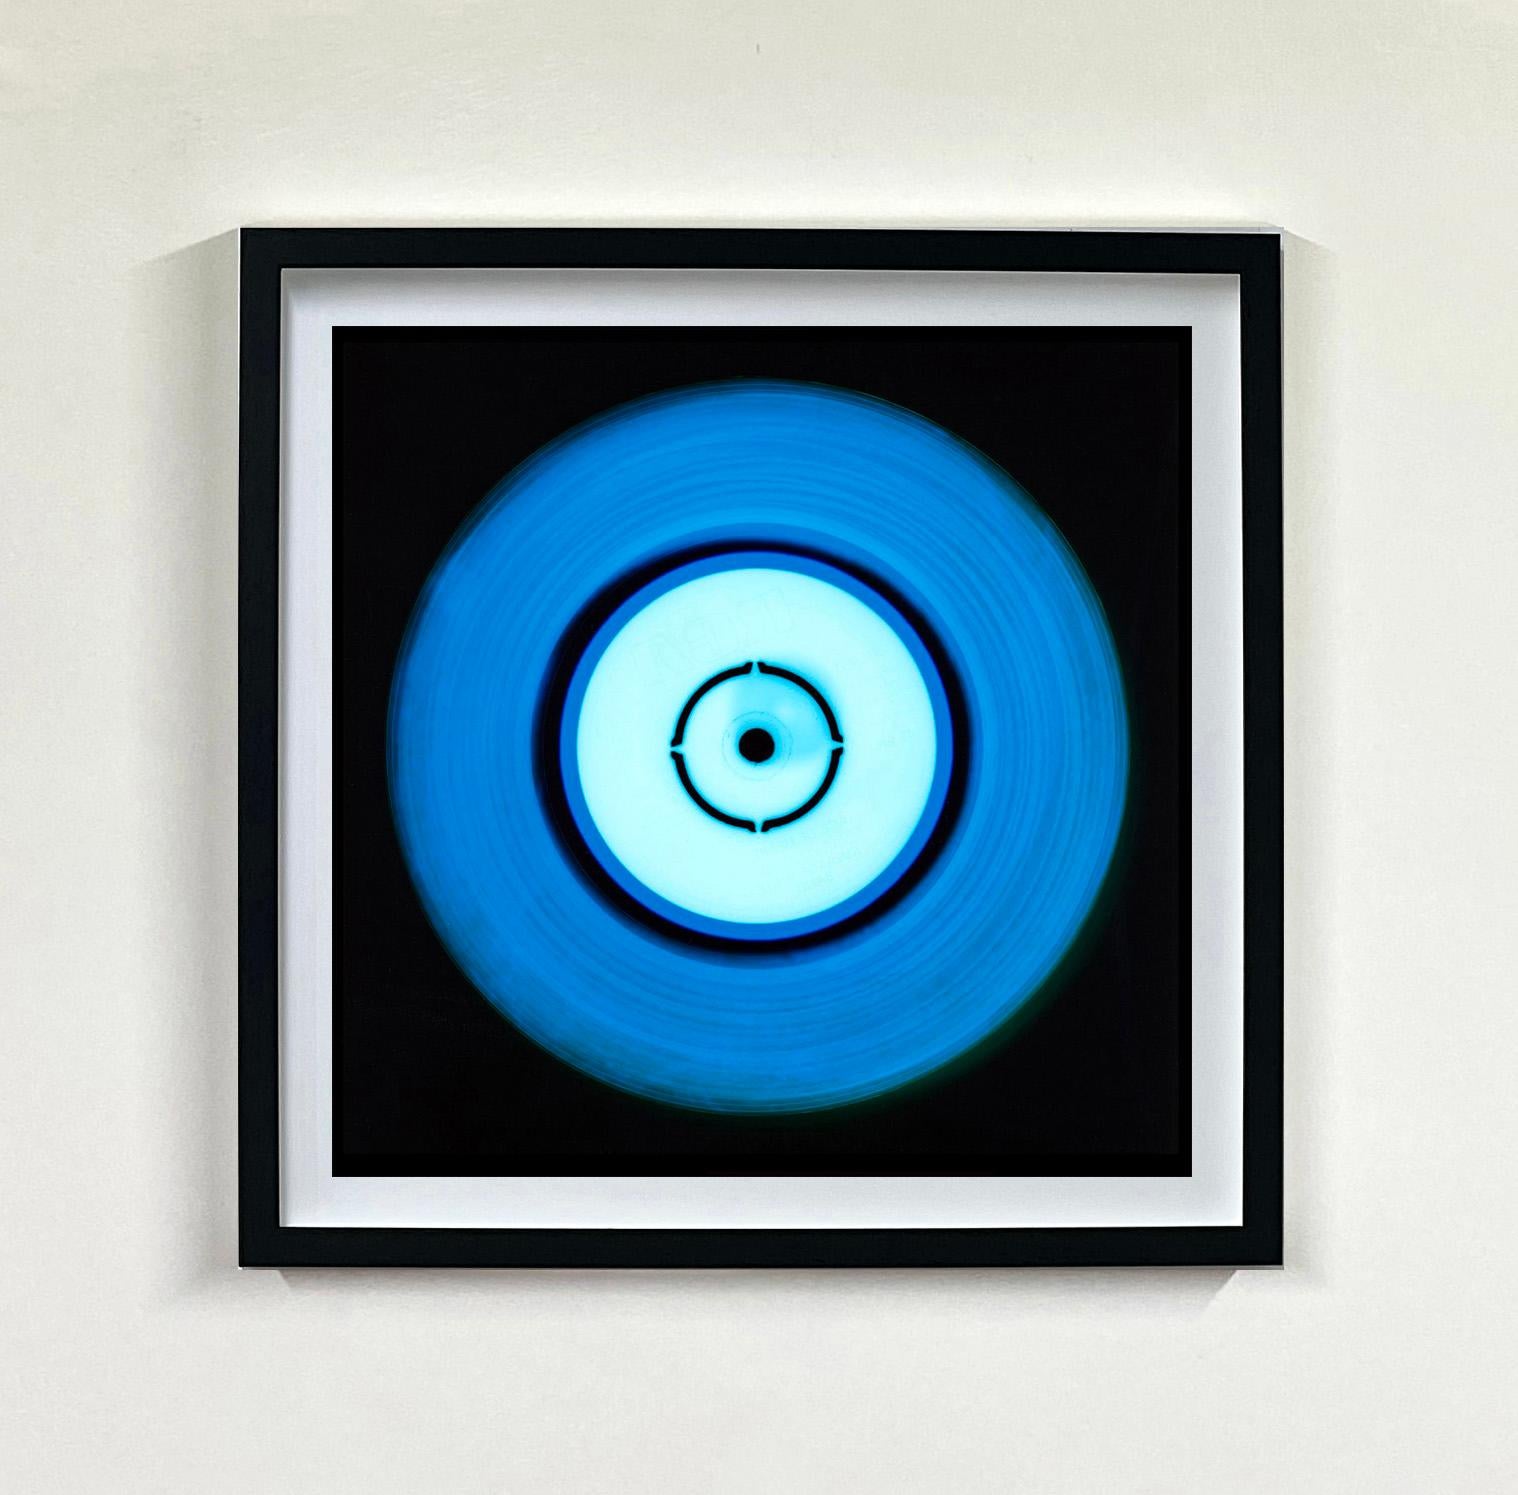 Heidler & Heeps Vinyl Collection Ten Piece Multicolor Installation.
Acclaimed contemporary photographers, Richard Heeps and Natasha Heidler have collaborated to make this beautifully mesmerising collection. A celebration of the vinyl record and